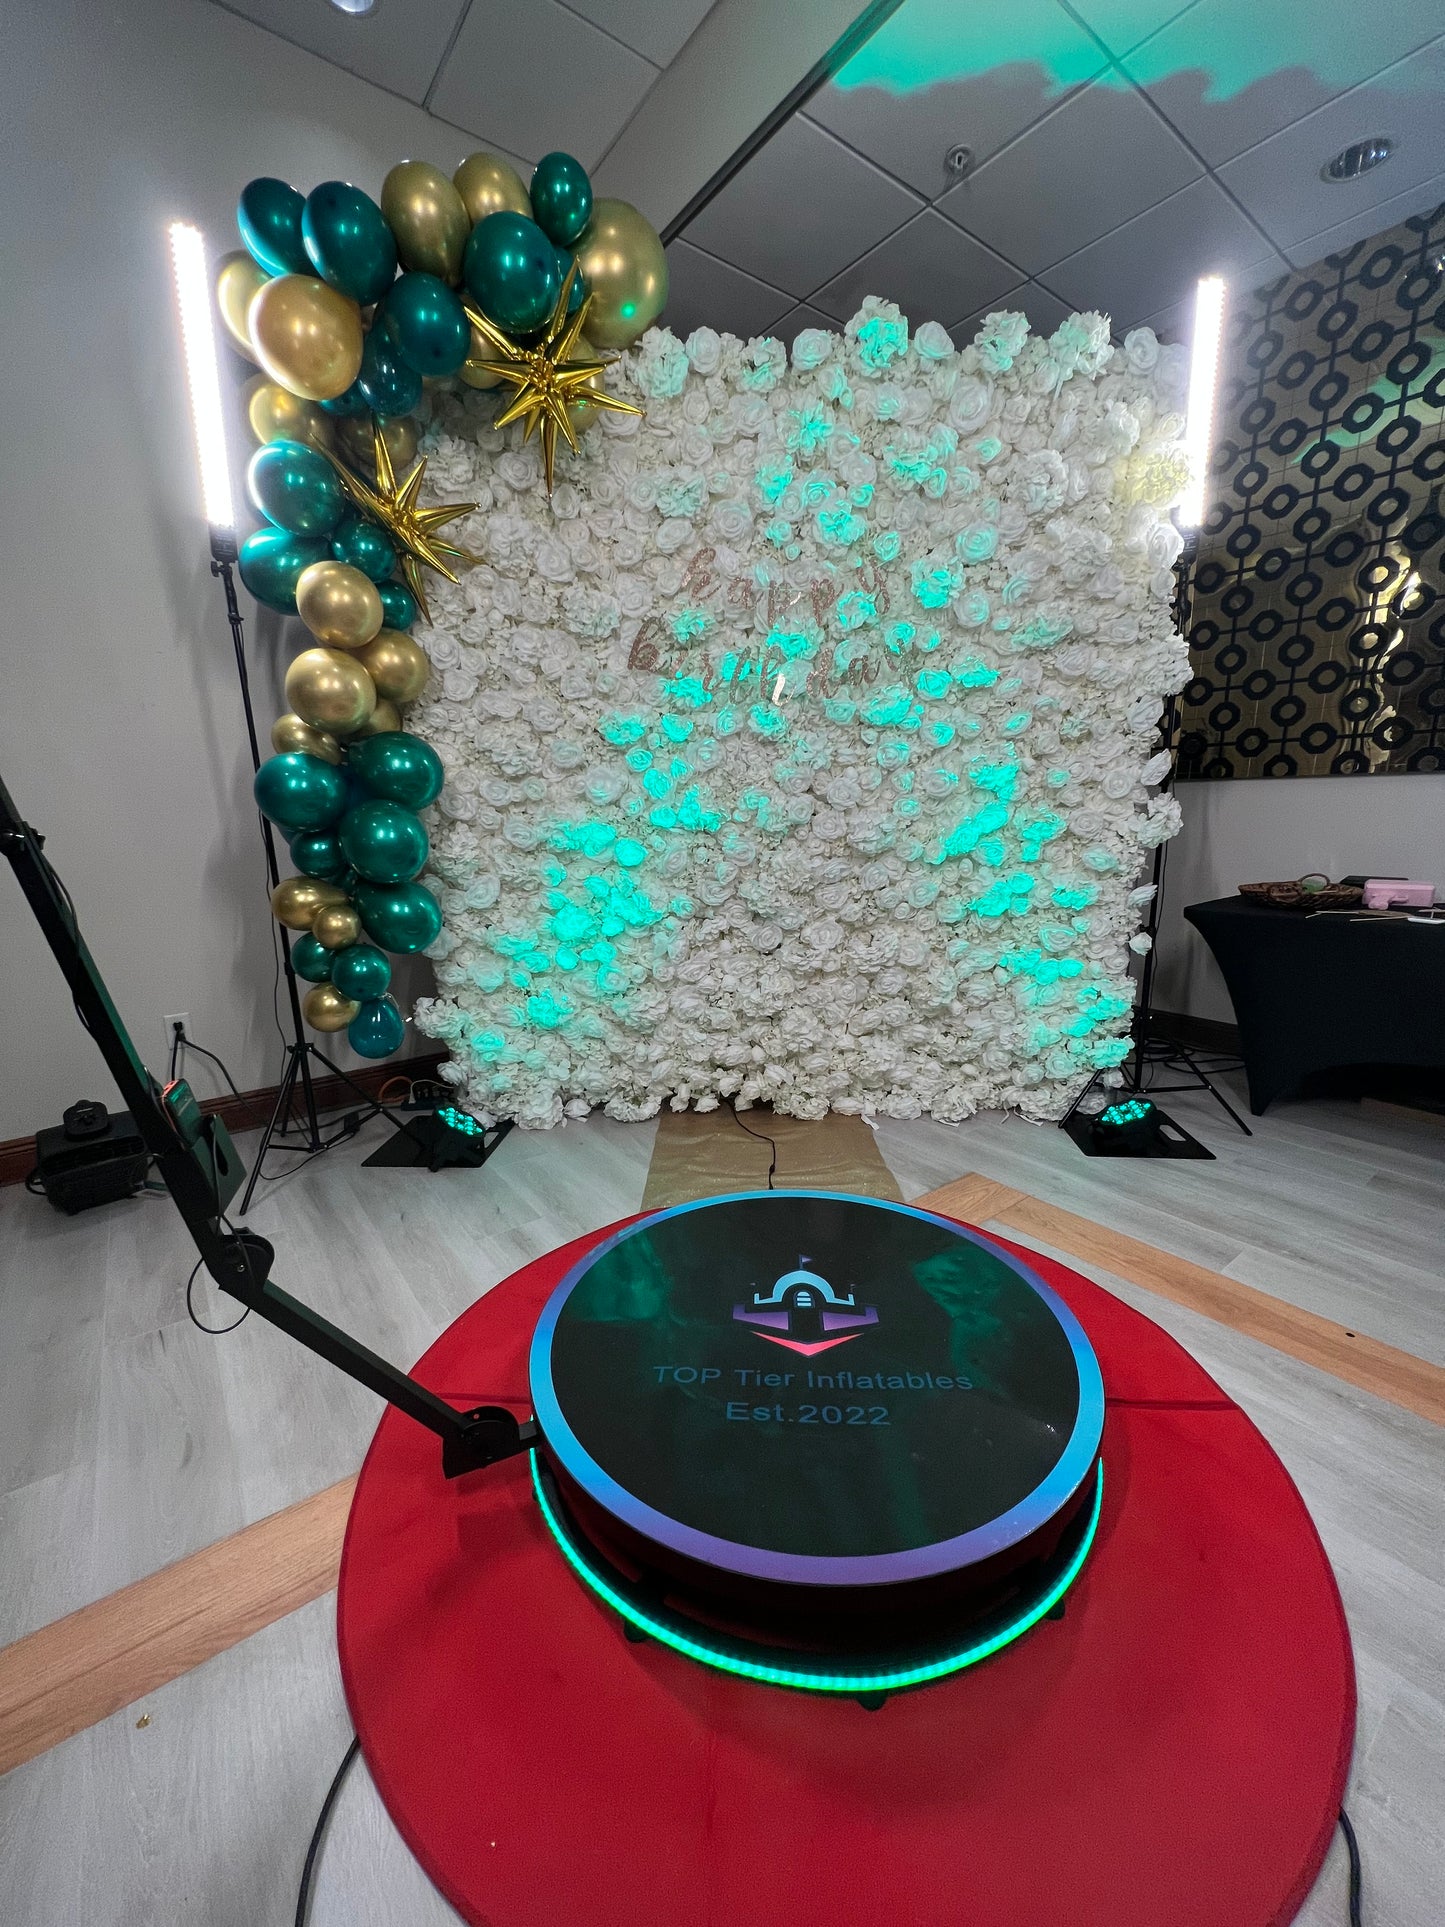 Deluxe 360° photo-booth rental package